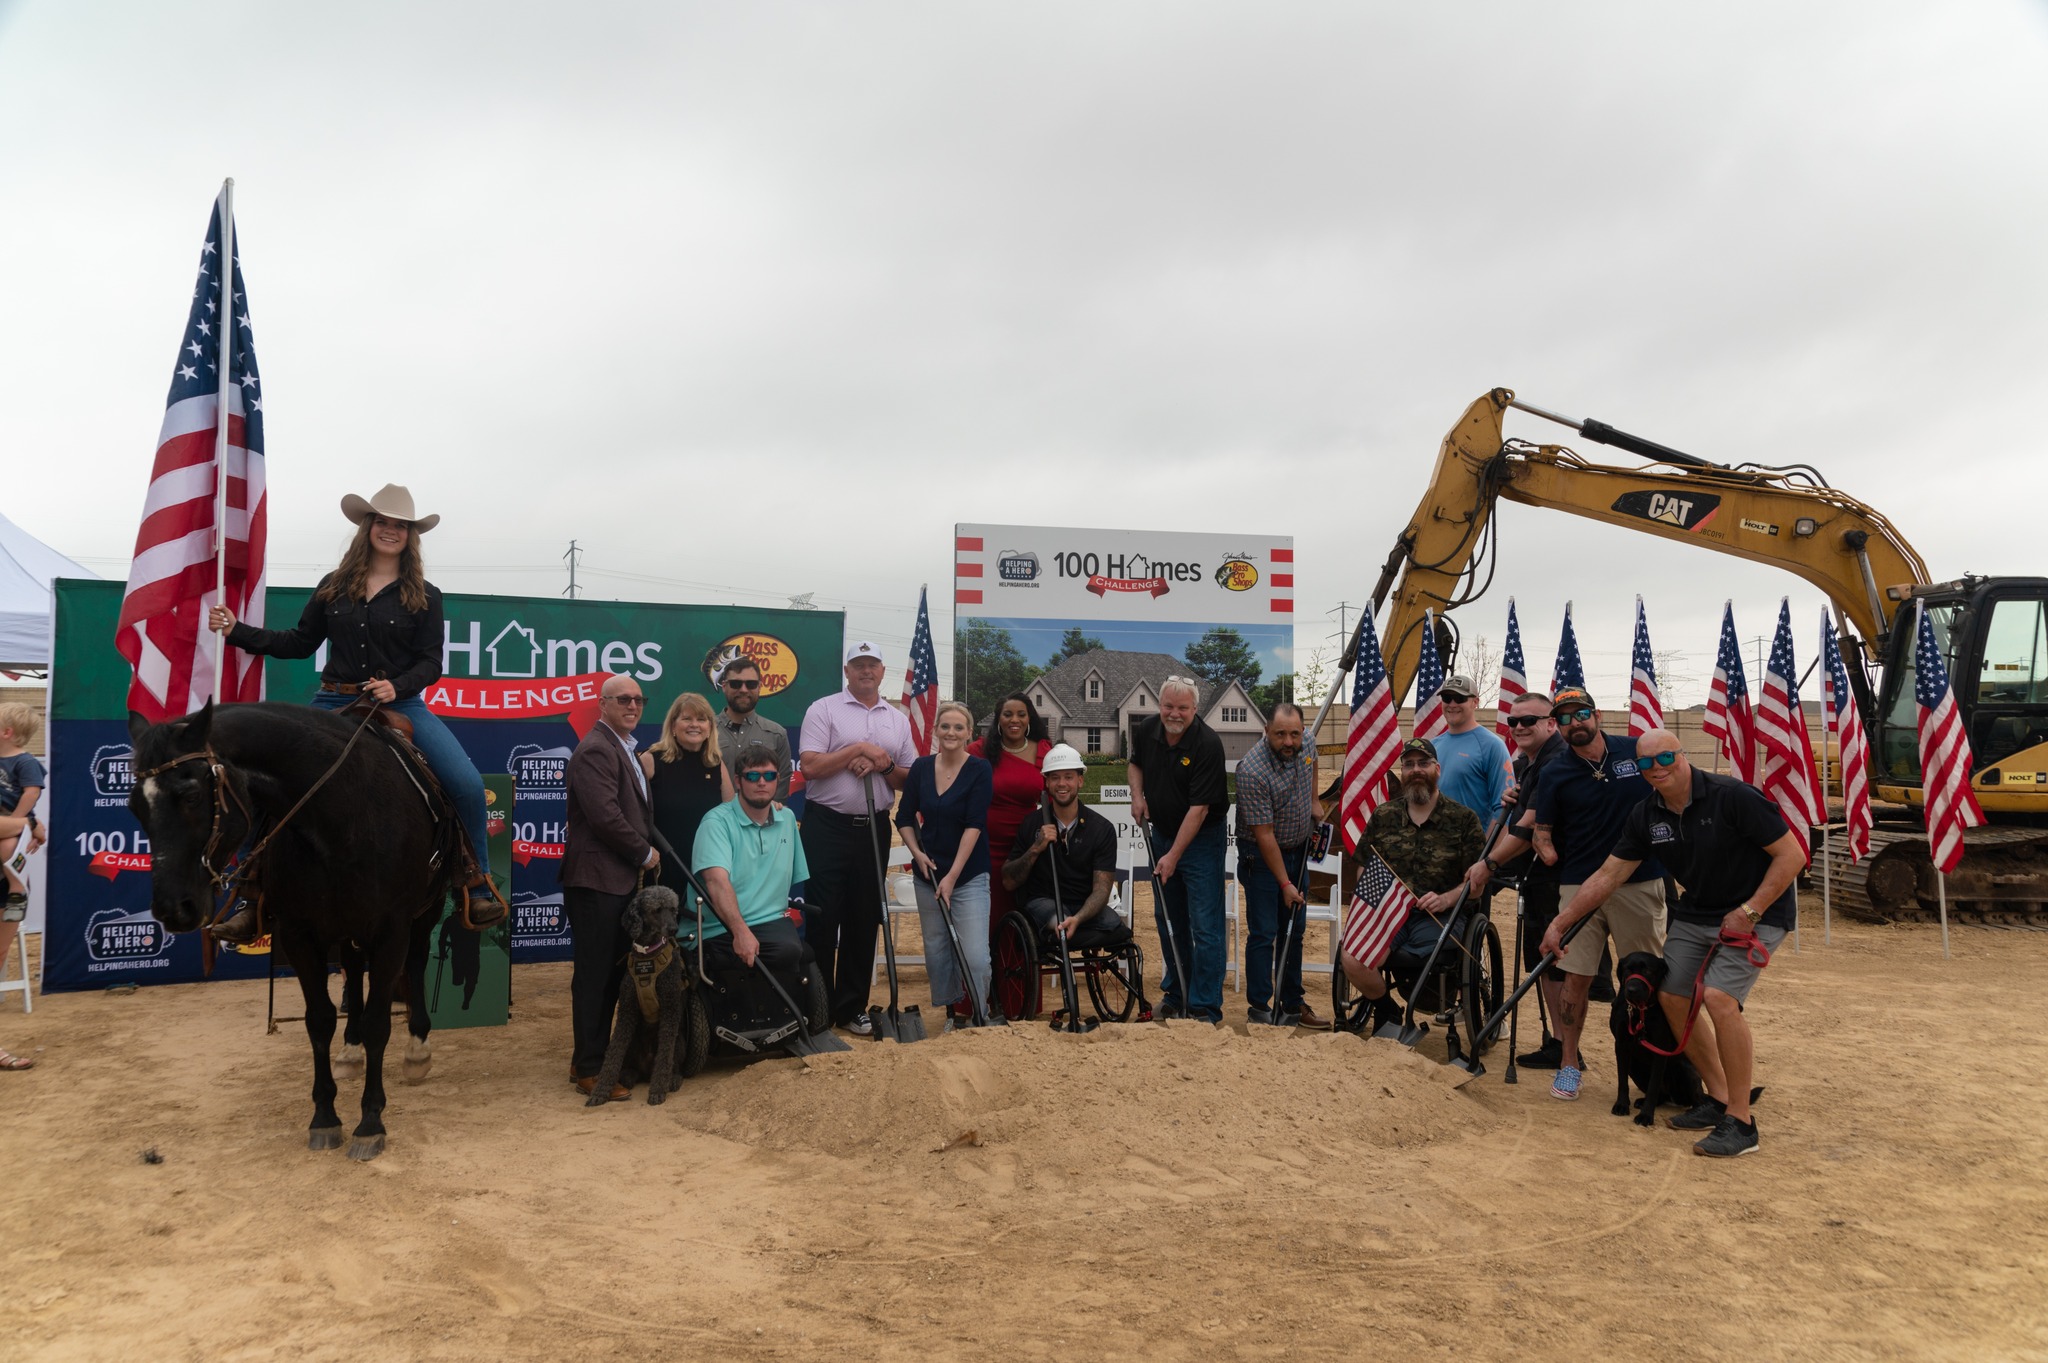 Groundbreaking for Decorated Wounded Warrior's New Home Celebrated in Bridgeland